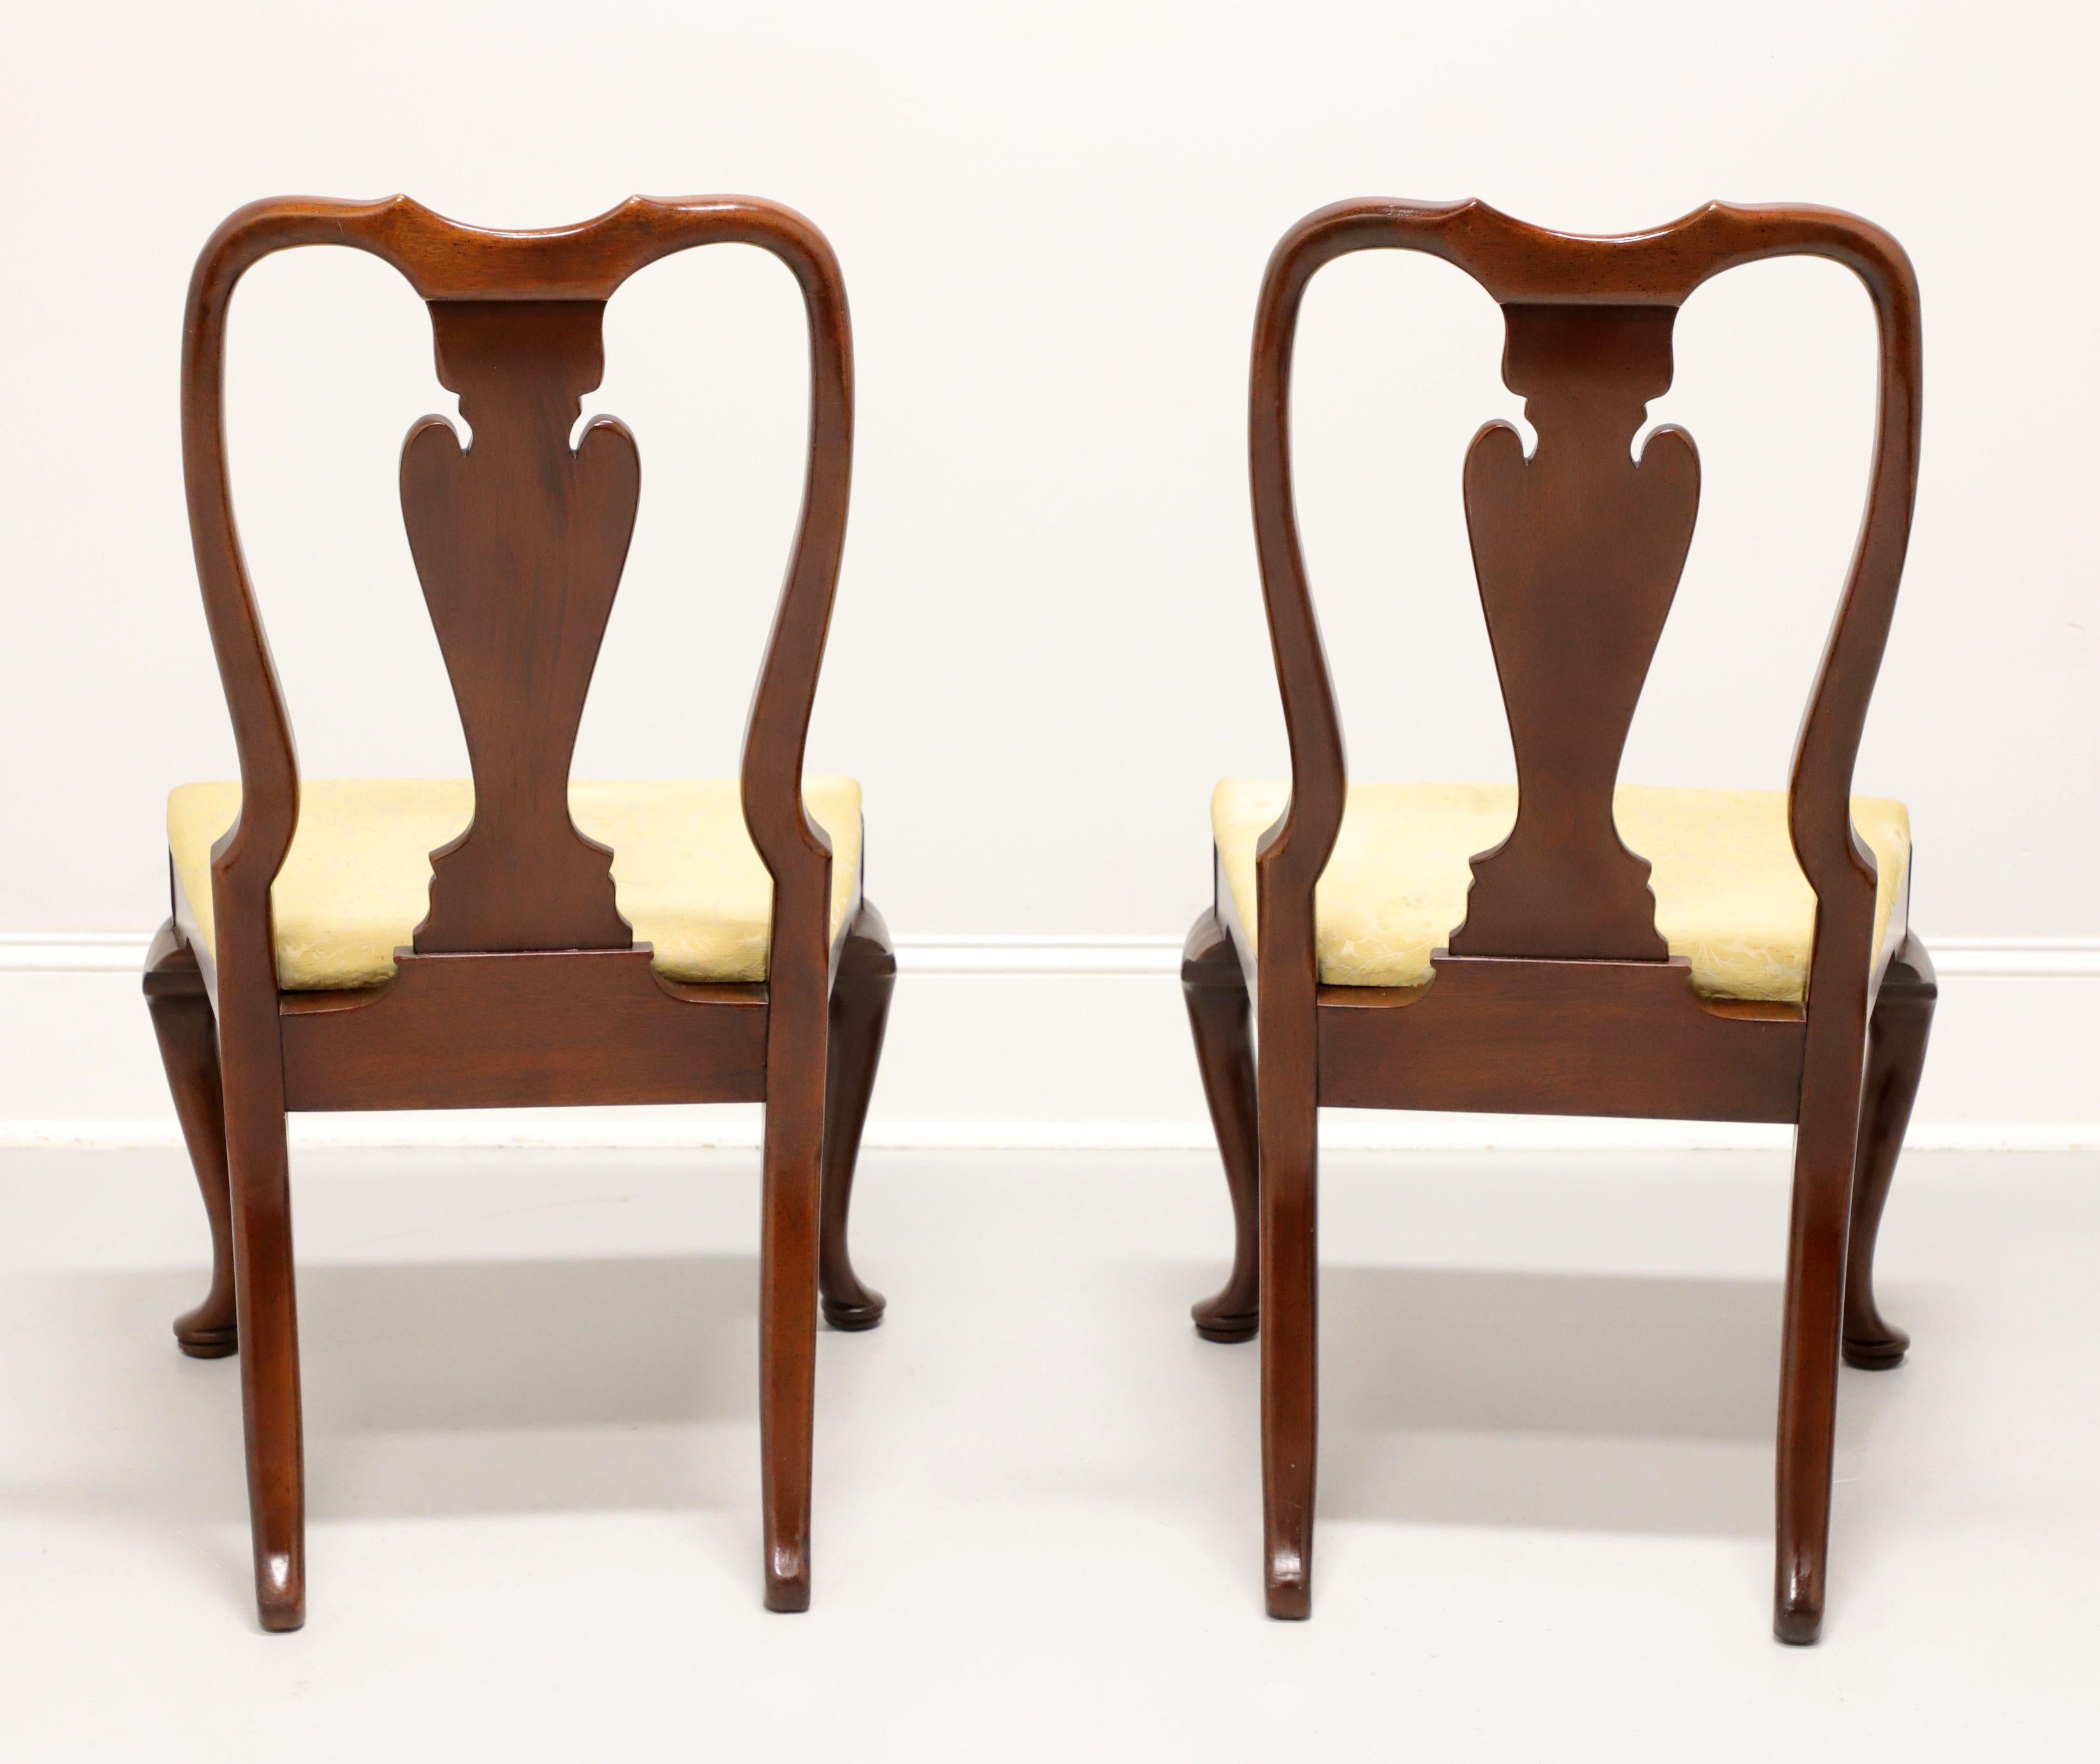 20th Century HICKORY CHAIR Mahogany Queen Anne Dining Side Chairs - Pair A